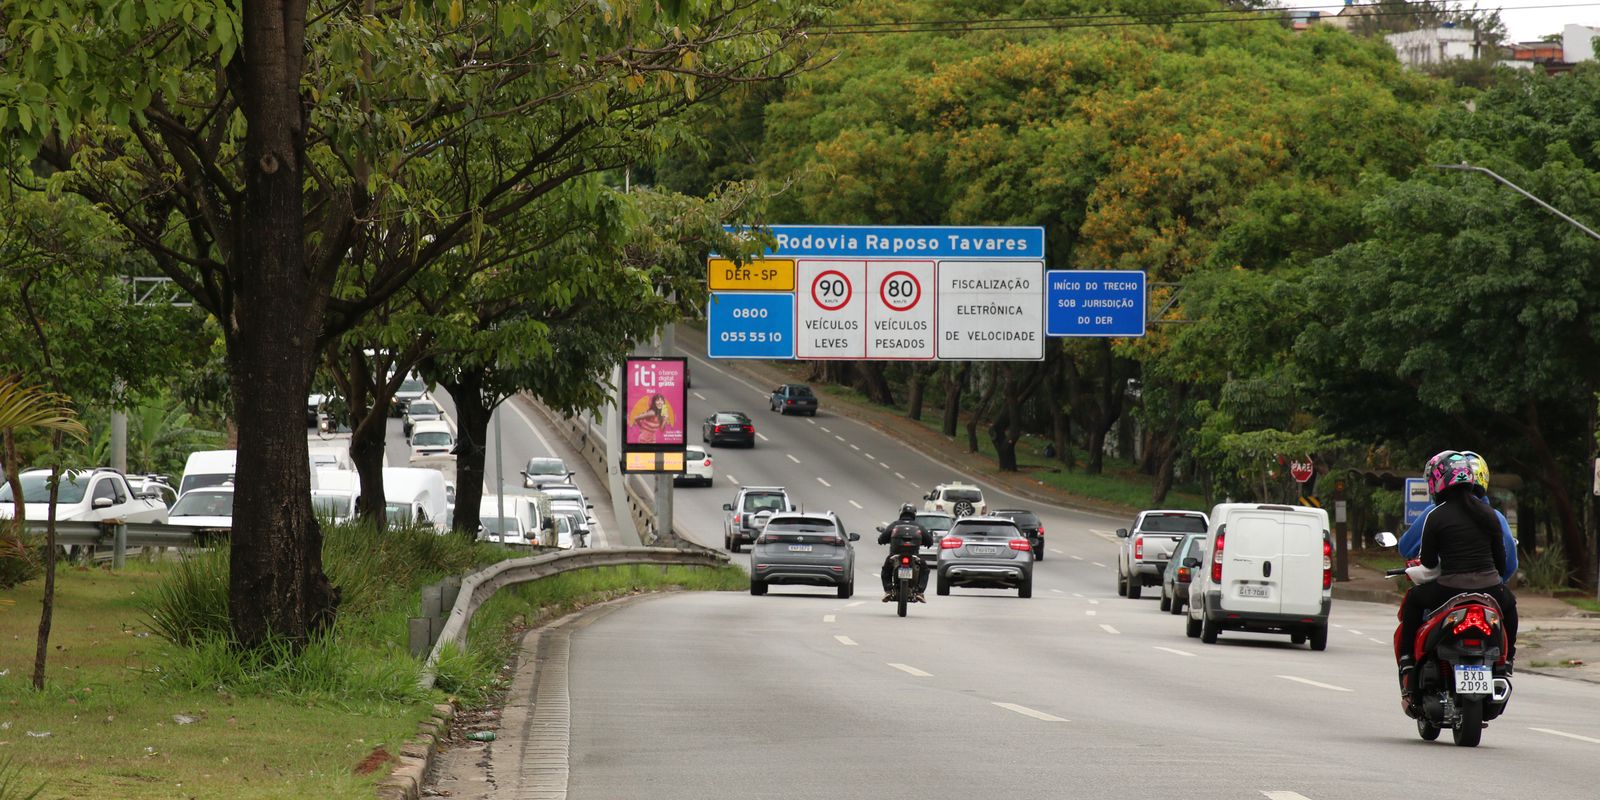 Return of the holiday has congestion points on highways in SP